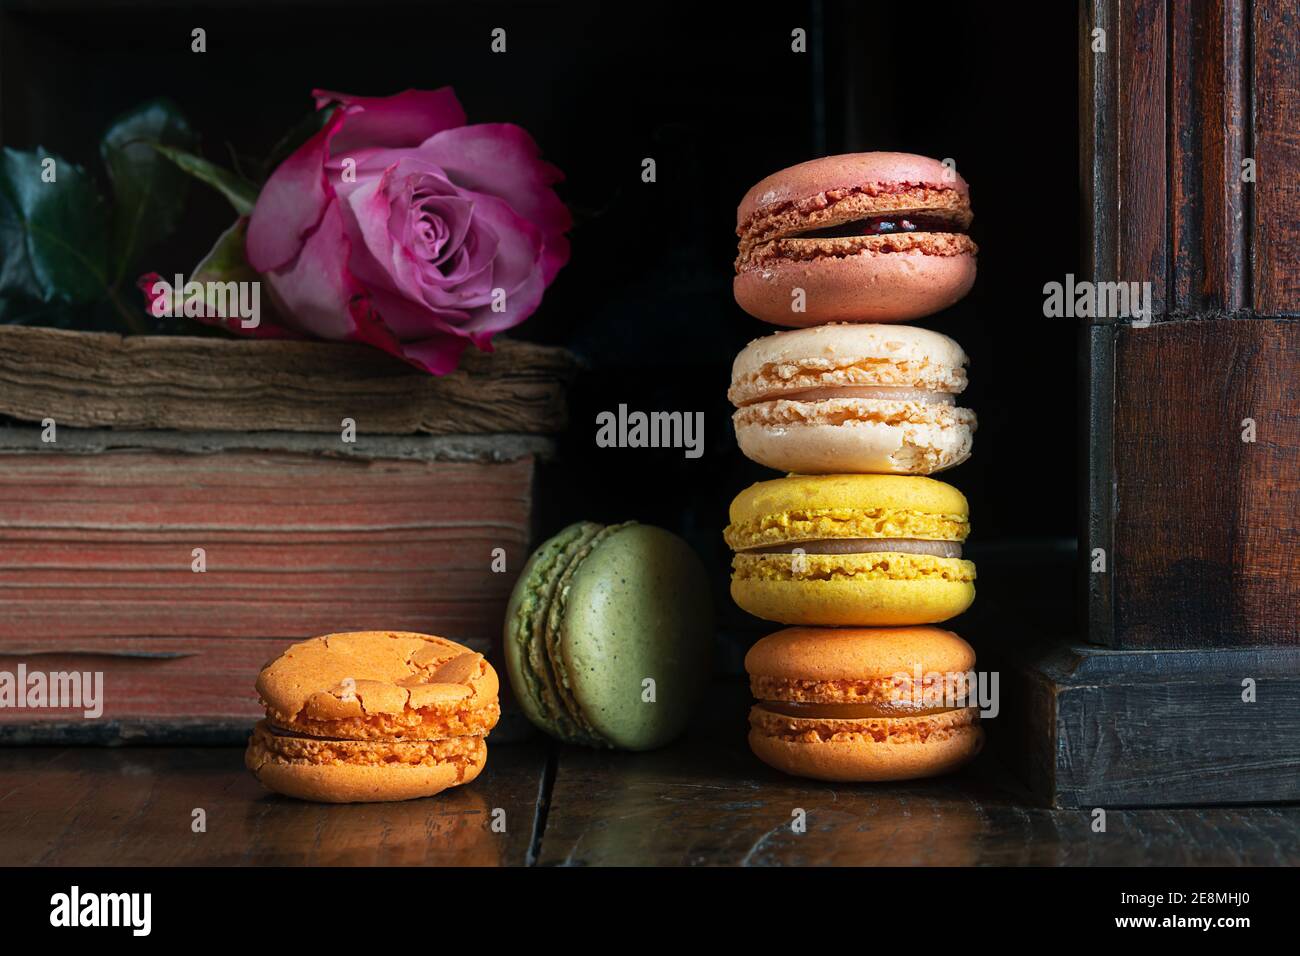 Stack of delicious classic french macaroons, an old book and a rose on vintage dark sideboard Stock Photo